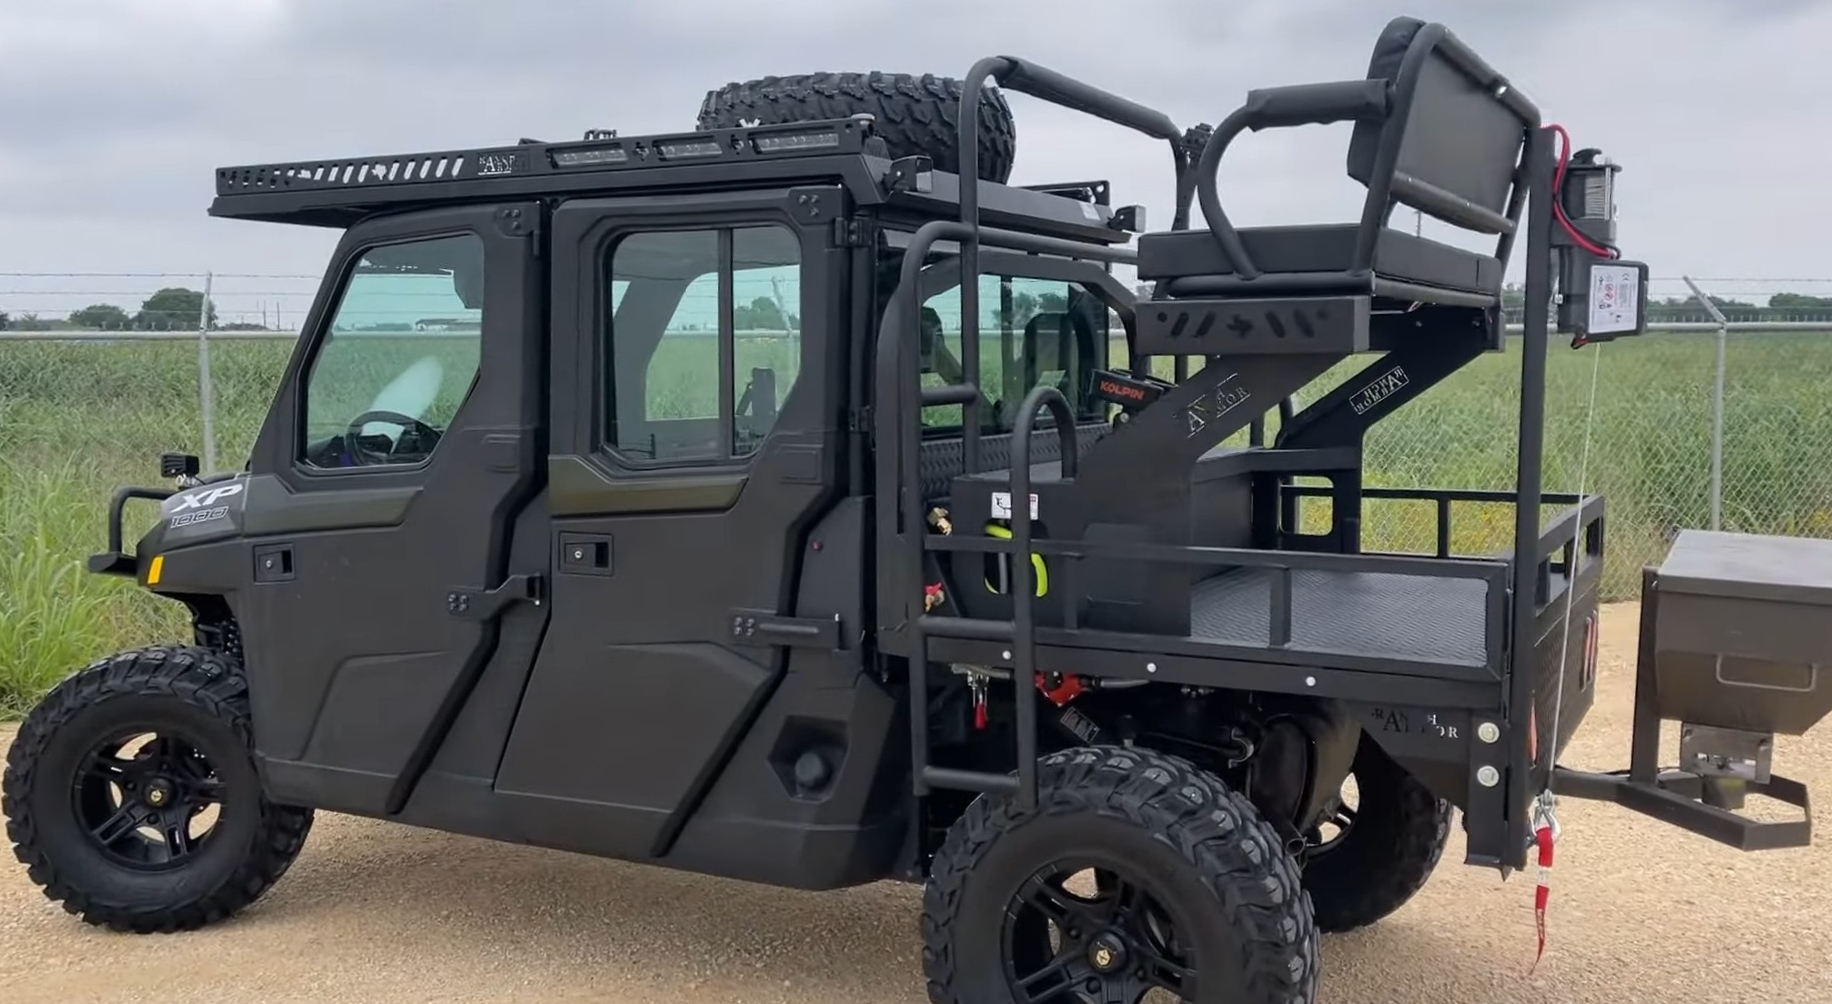 A Polaris Ranger XP 1000 NorthStar is parked in front of a green field with fence.